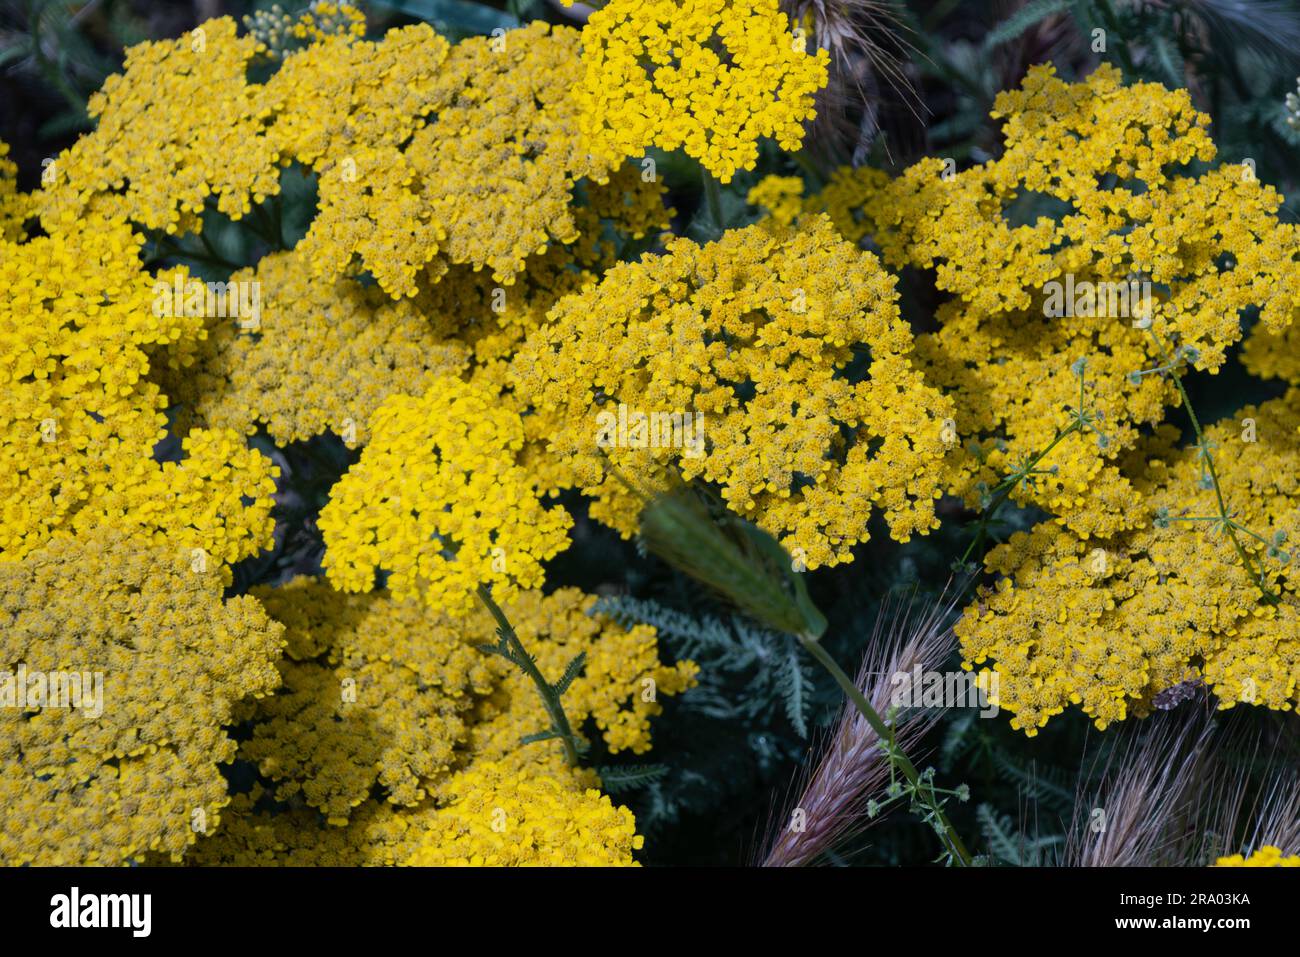 Achillea' filipendulina 'Parker's Variety' yellow flowers also known as yarrow 'Parker's Variety' Yellow Fernleaf Yarrow in flower Stock Photo